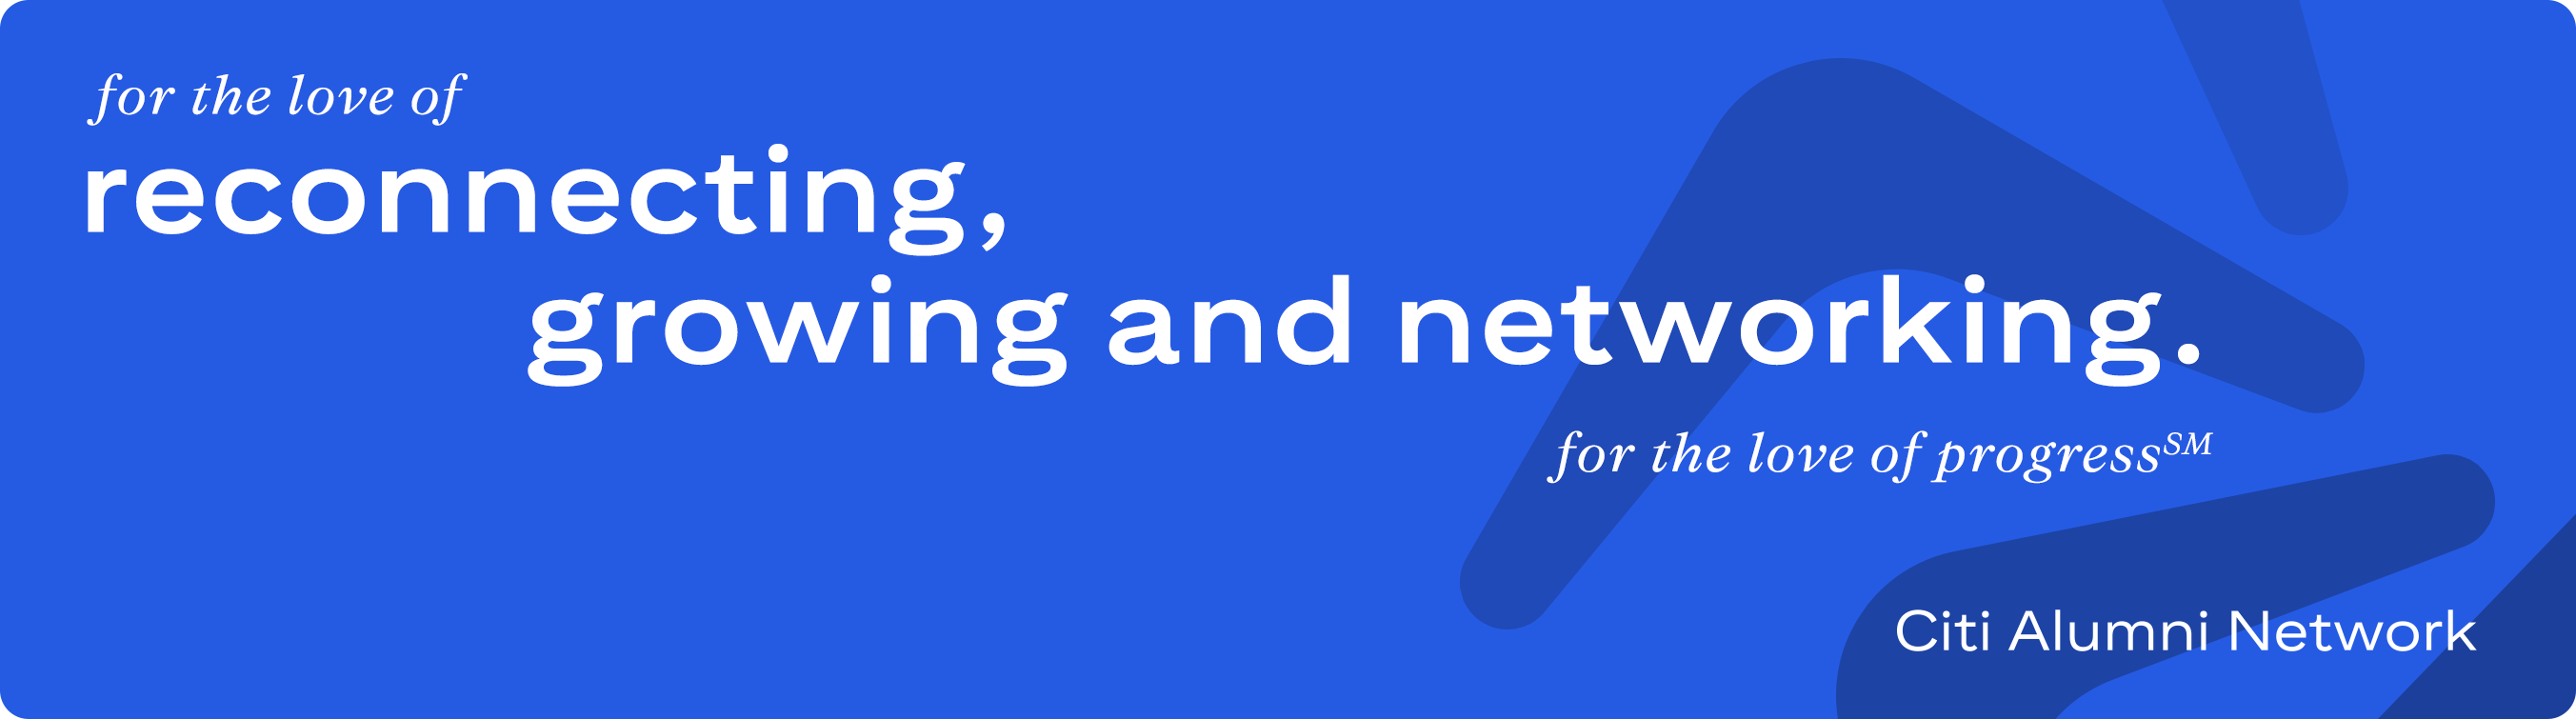 For the love of progress reconnecting growing and networking banner